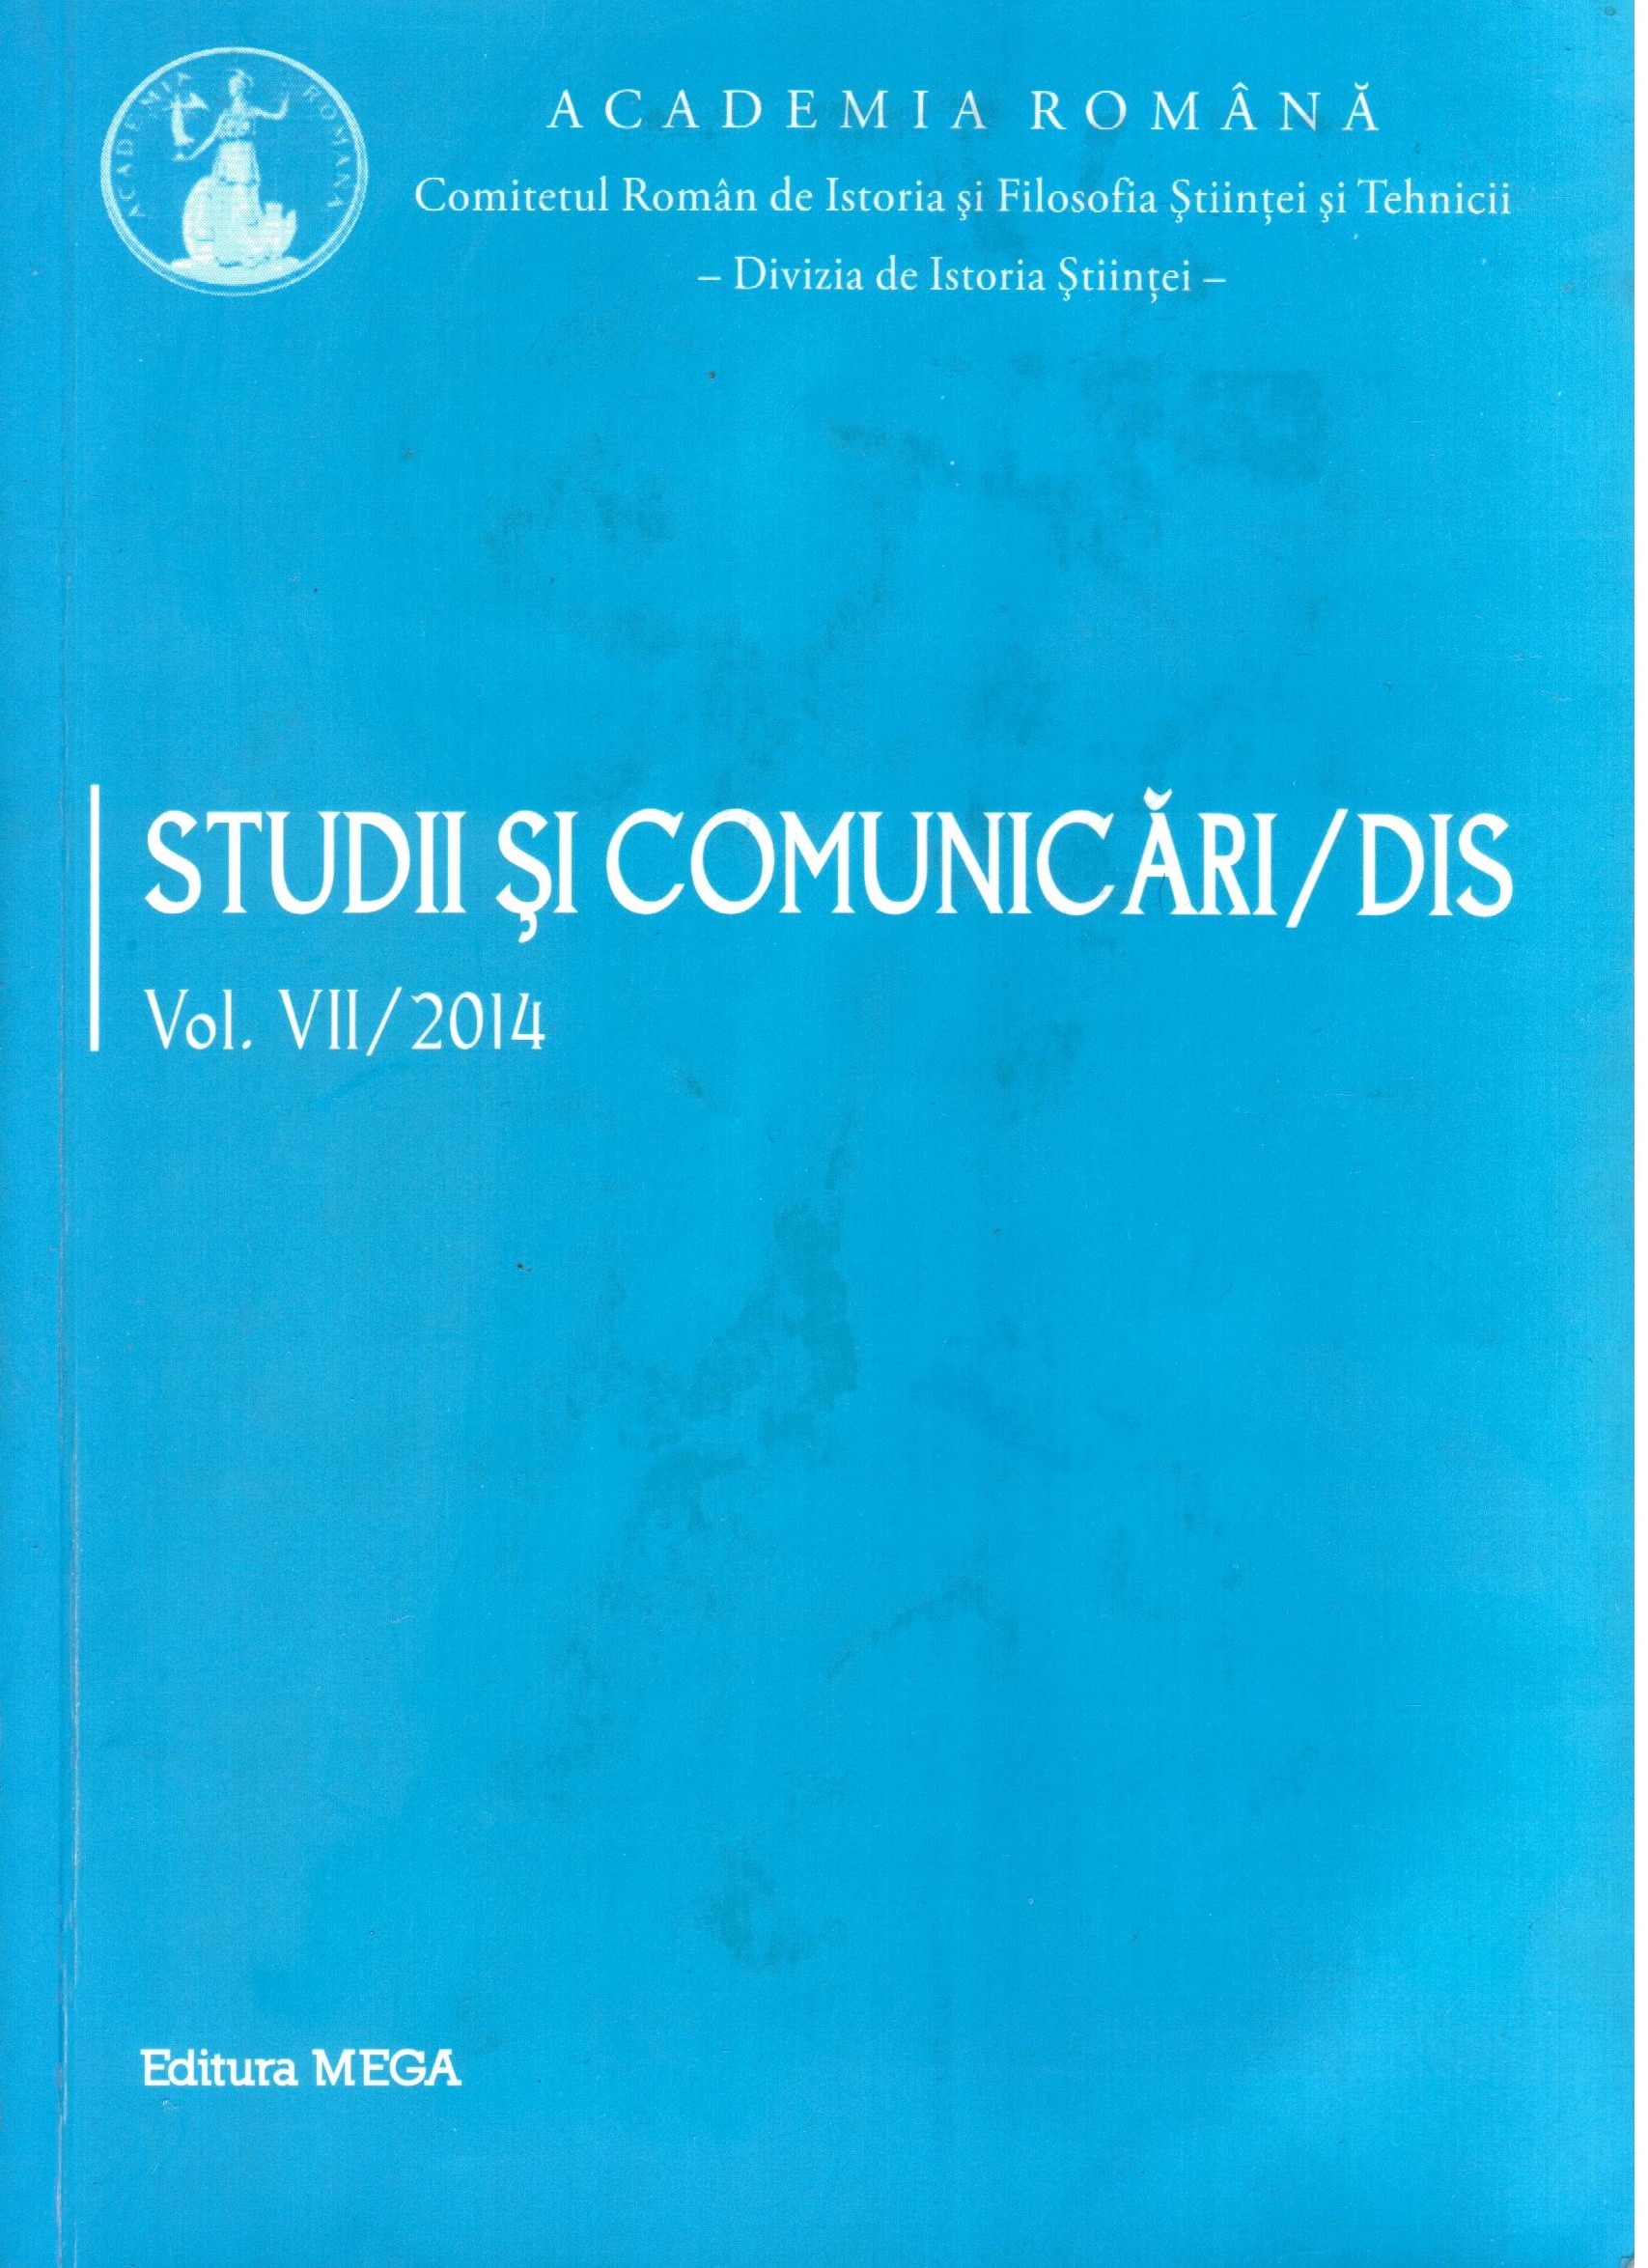 A Special Case in the Work of Academician Ștefan Pascu: Treatise on the "History of Romanian Scientific and Technical Thinking and Creation" Cover Image